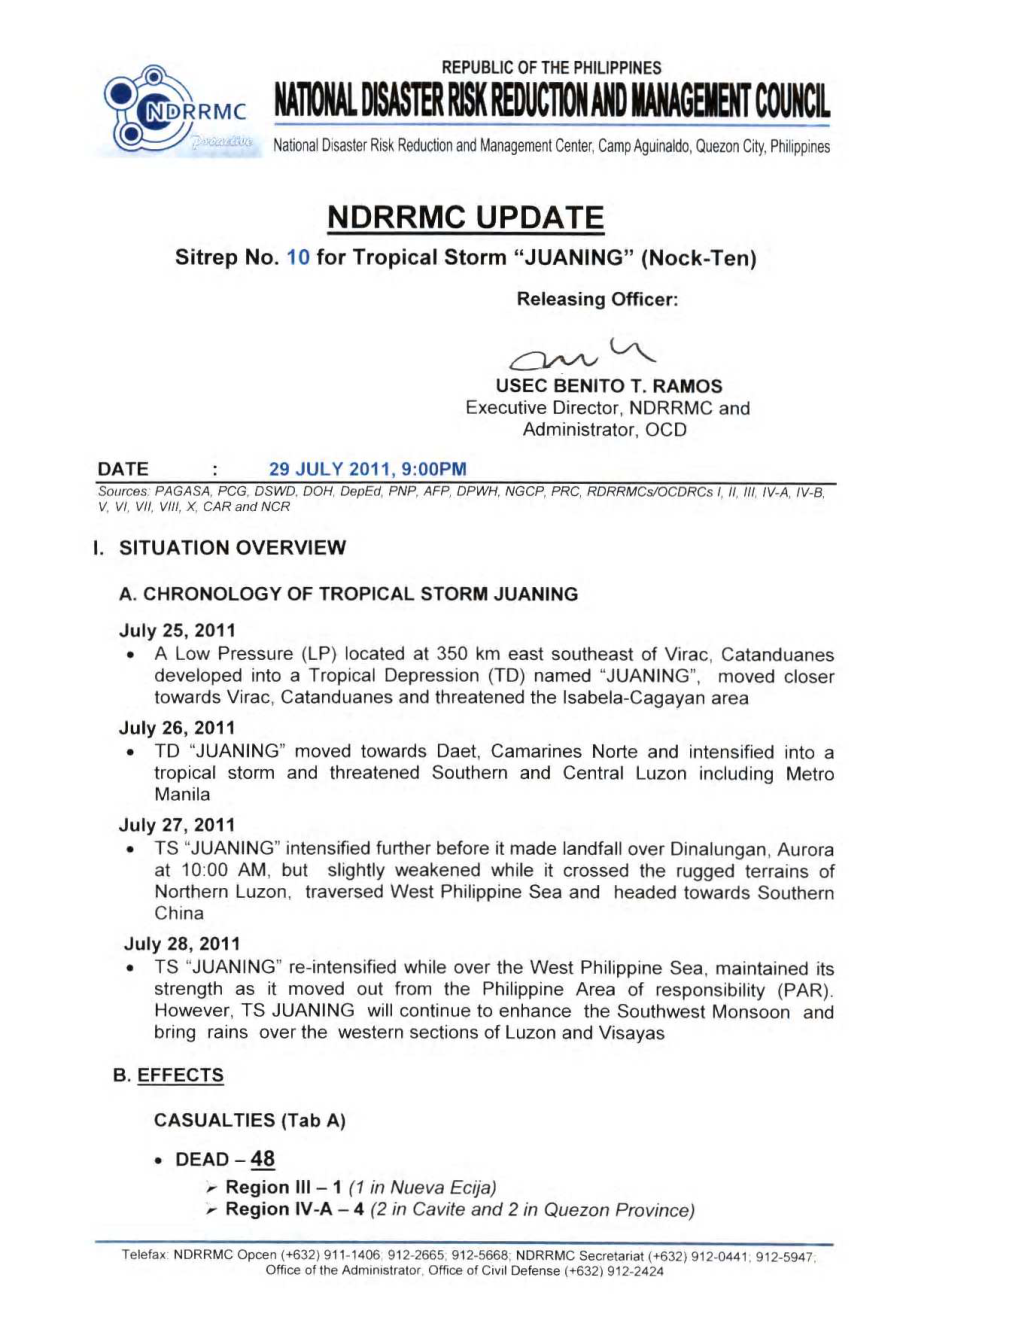 NDRRMC Update Sitrep No 10 Tropical Storm JUANING 29 July